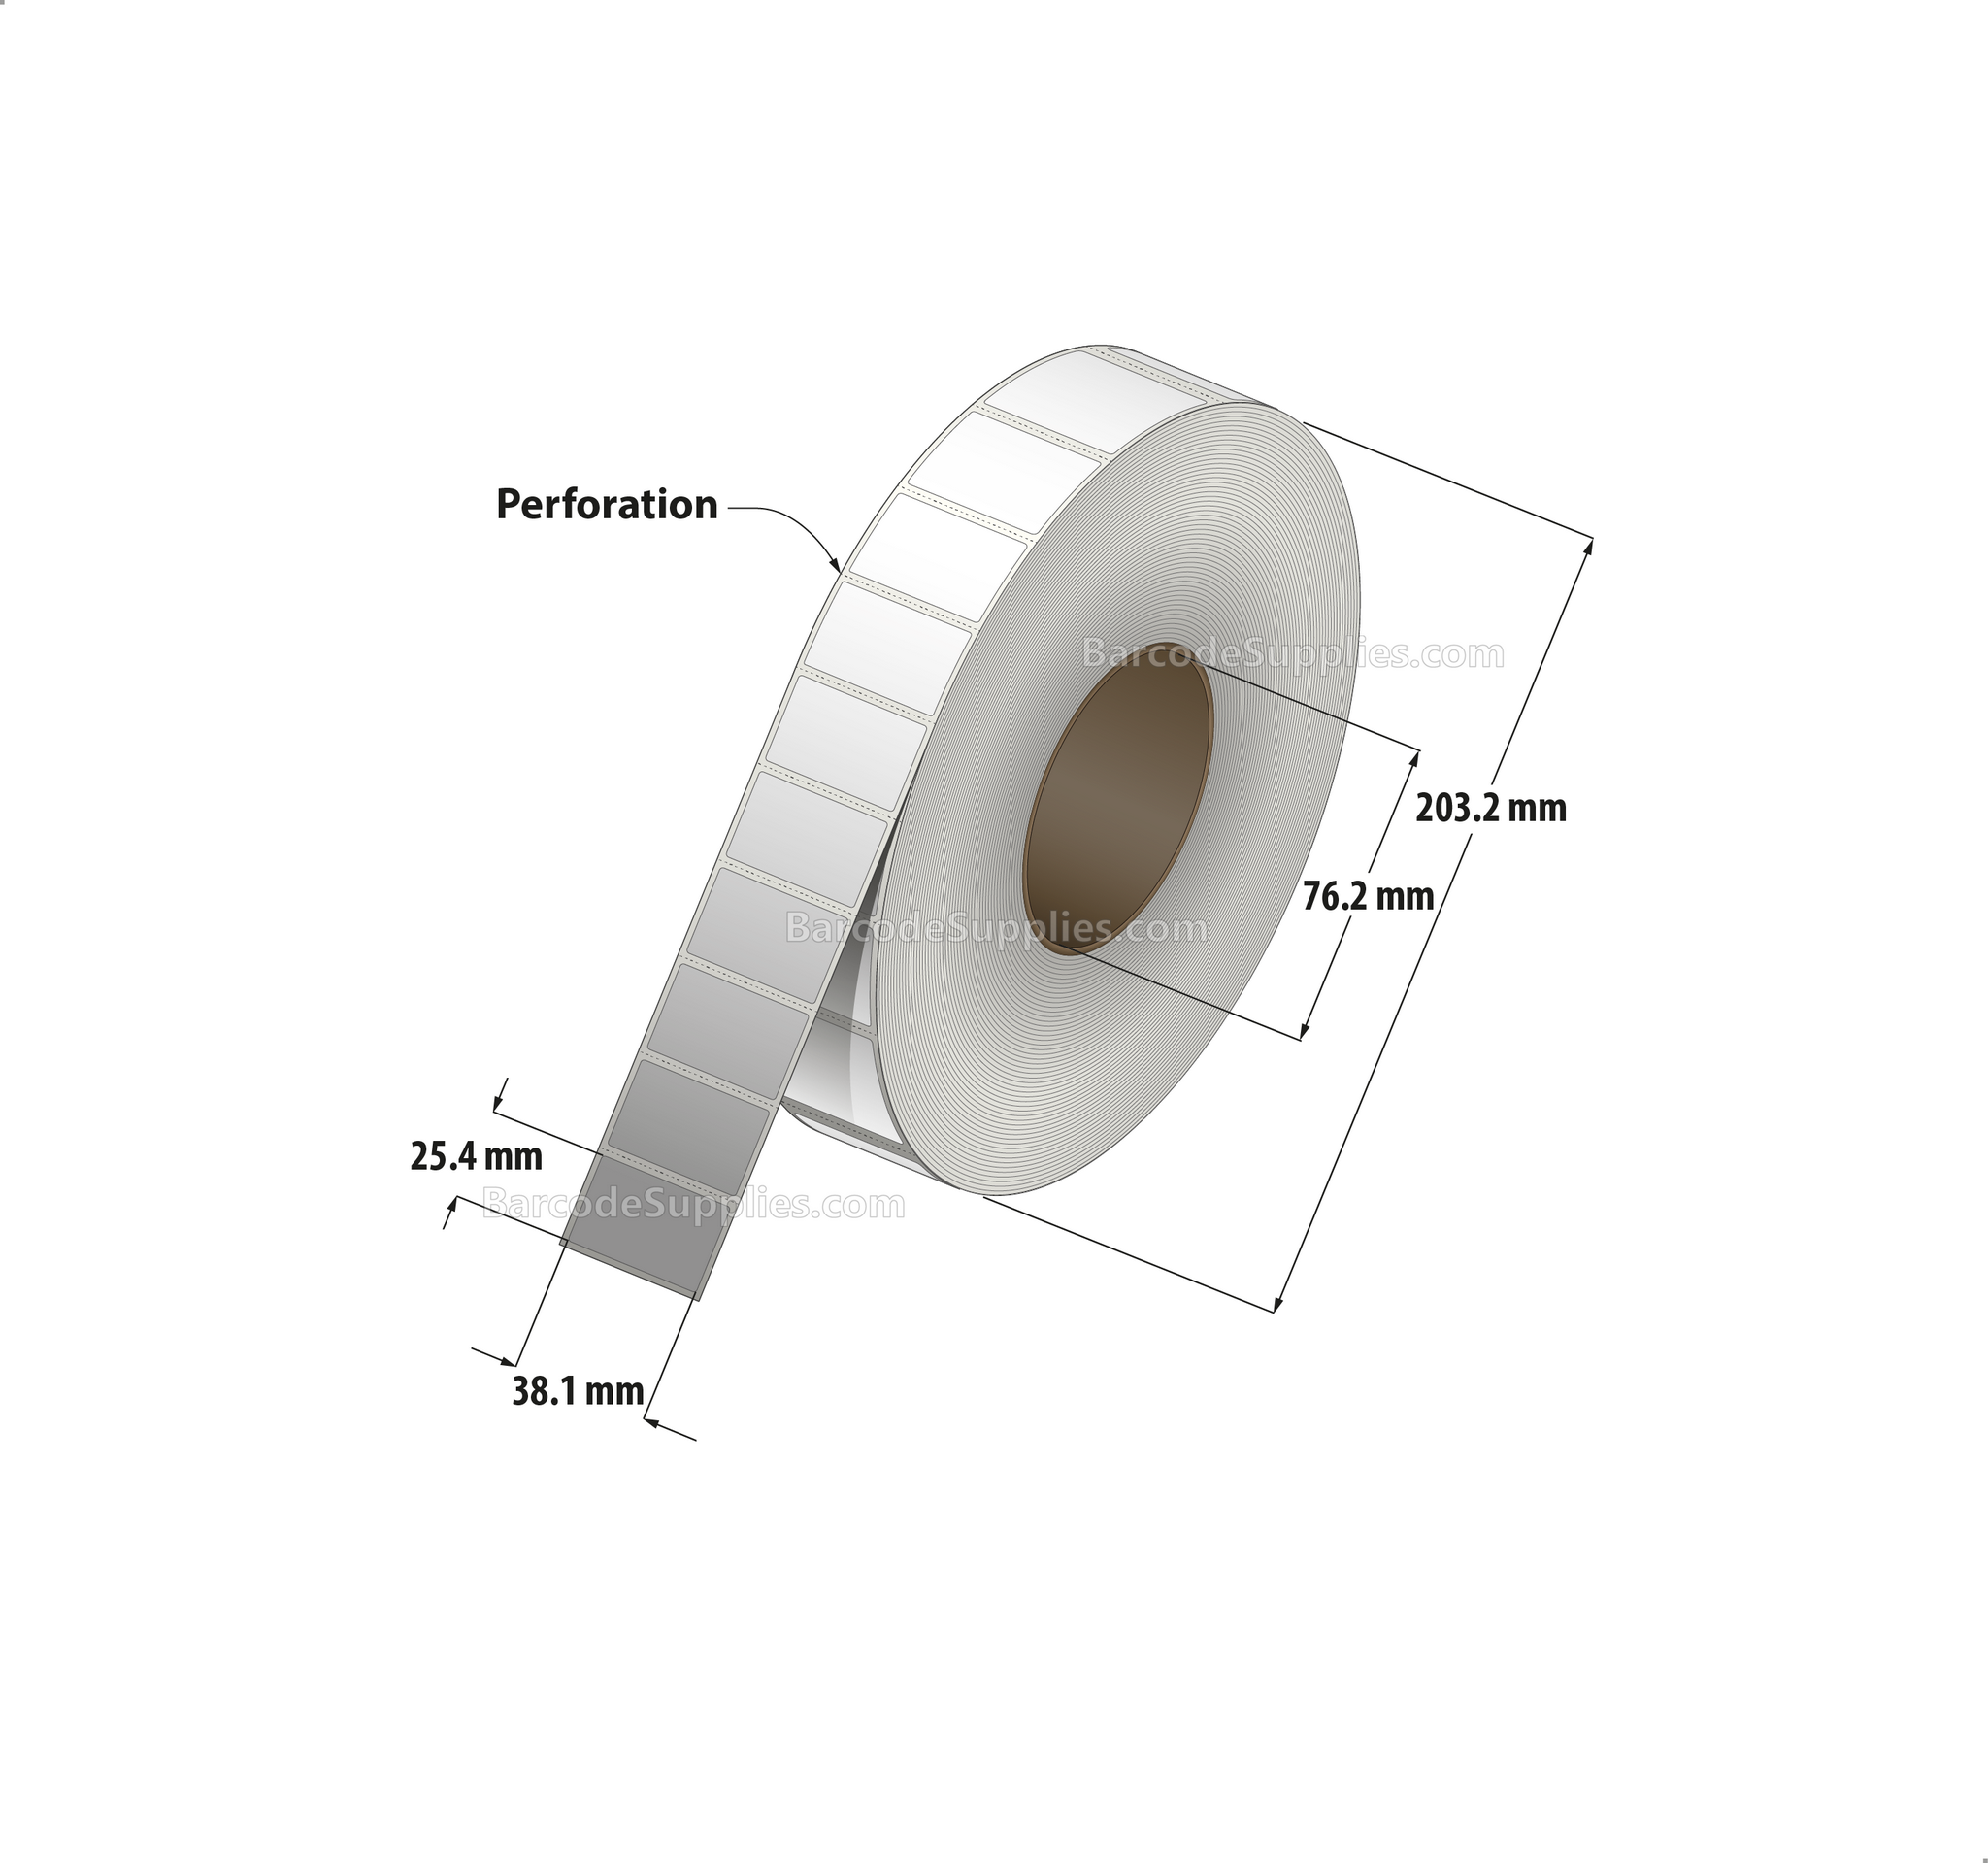 1.5 x 1 Direct Thermal White Labels With Acrylic Adhesive - Perforated - 5500 Labels Per Roll - Carton Of 8 Rolls - 44000 Labels Total - MPN: RDE-15-1-5500-3